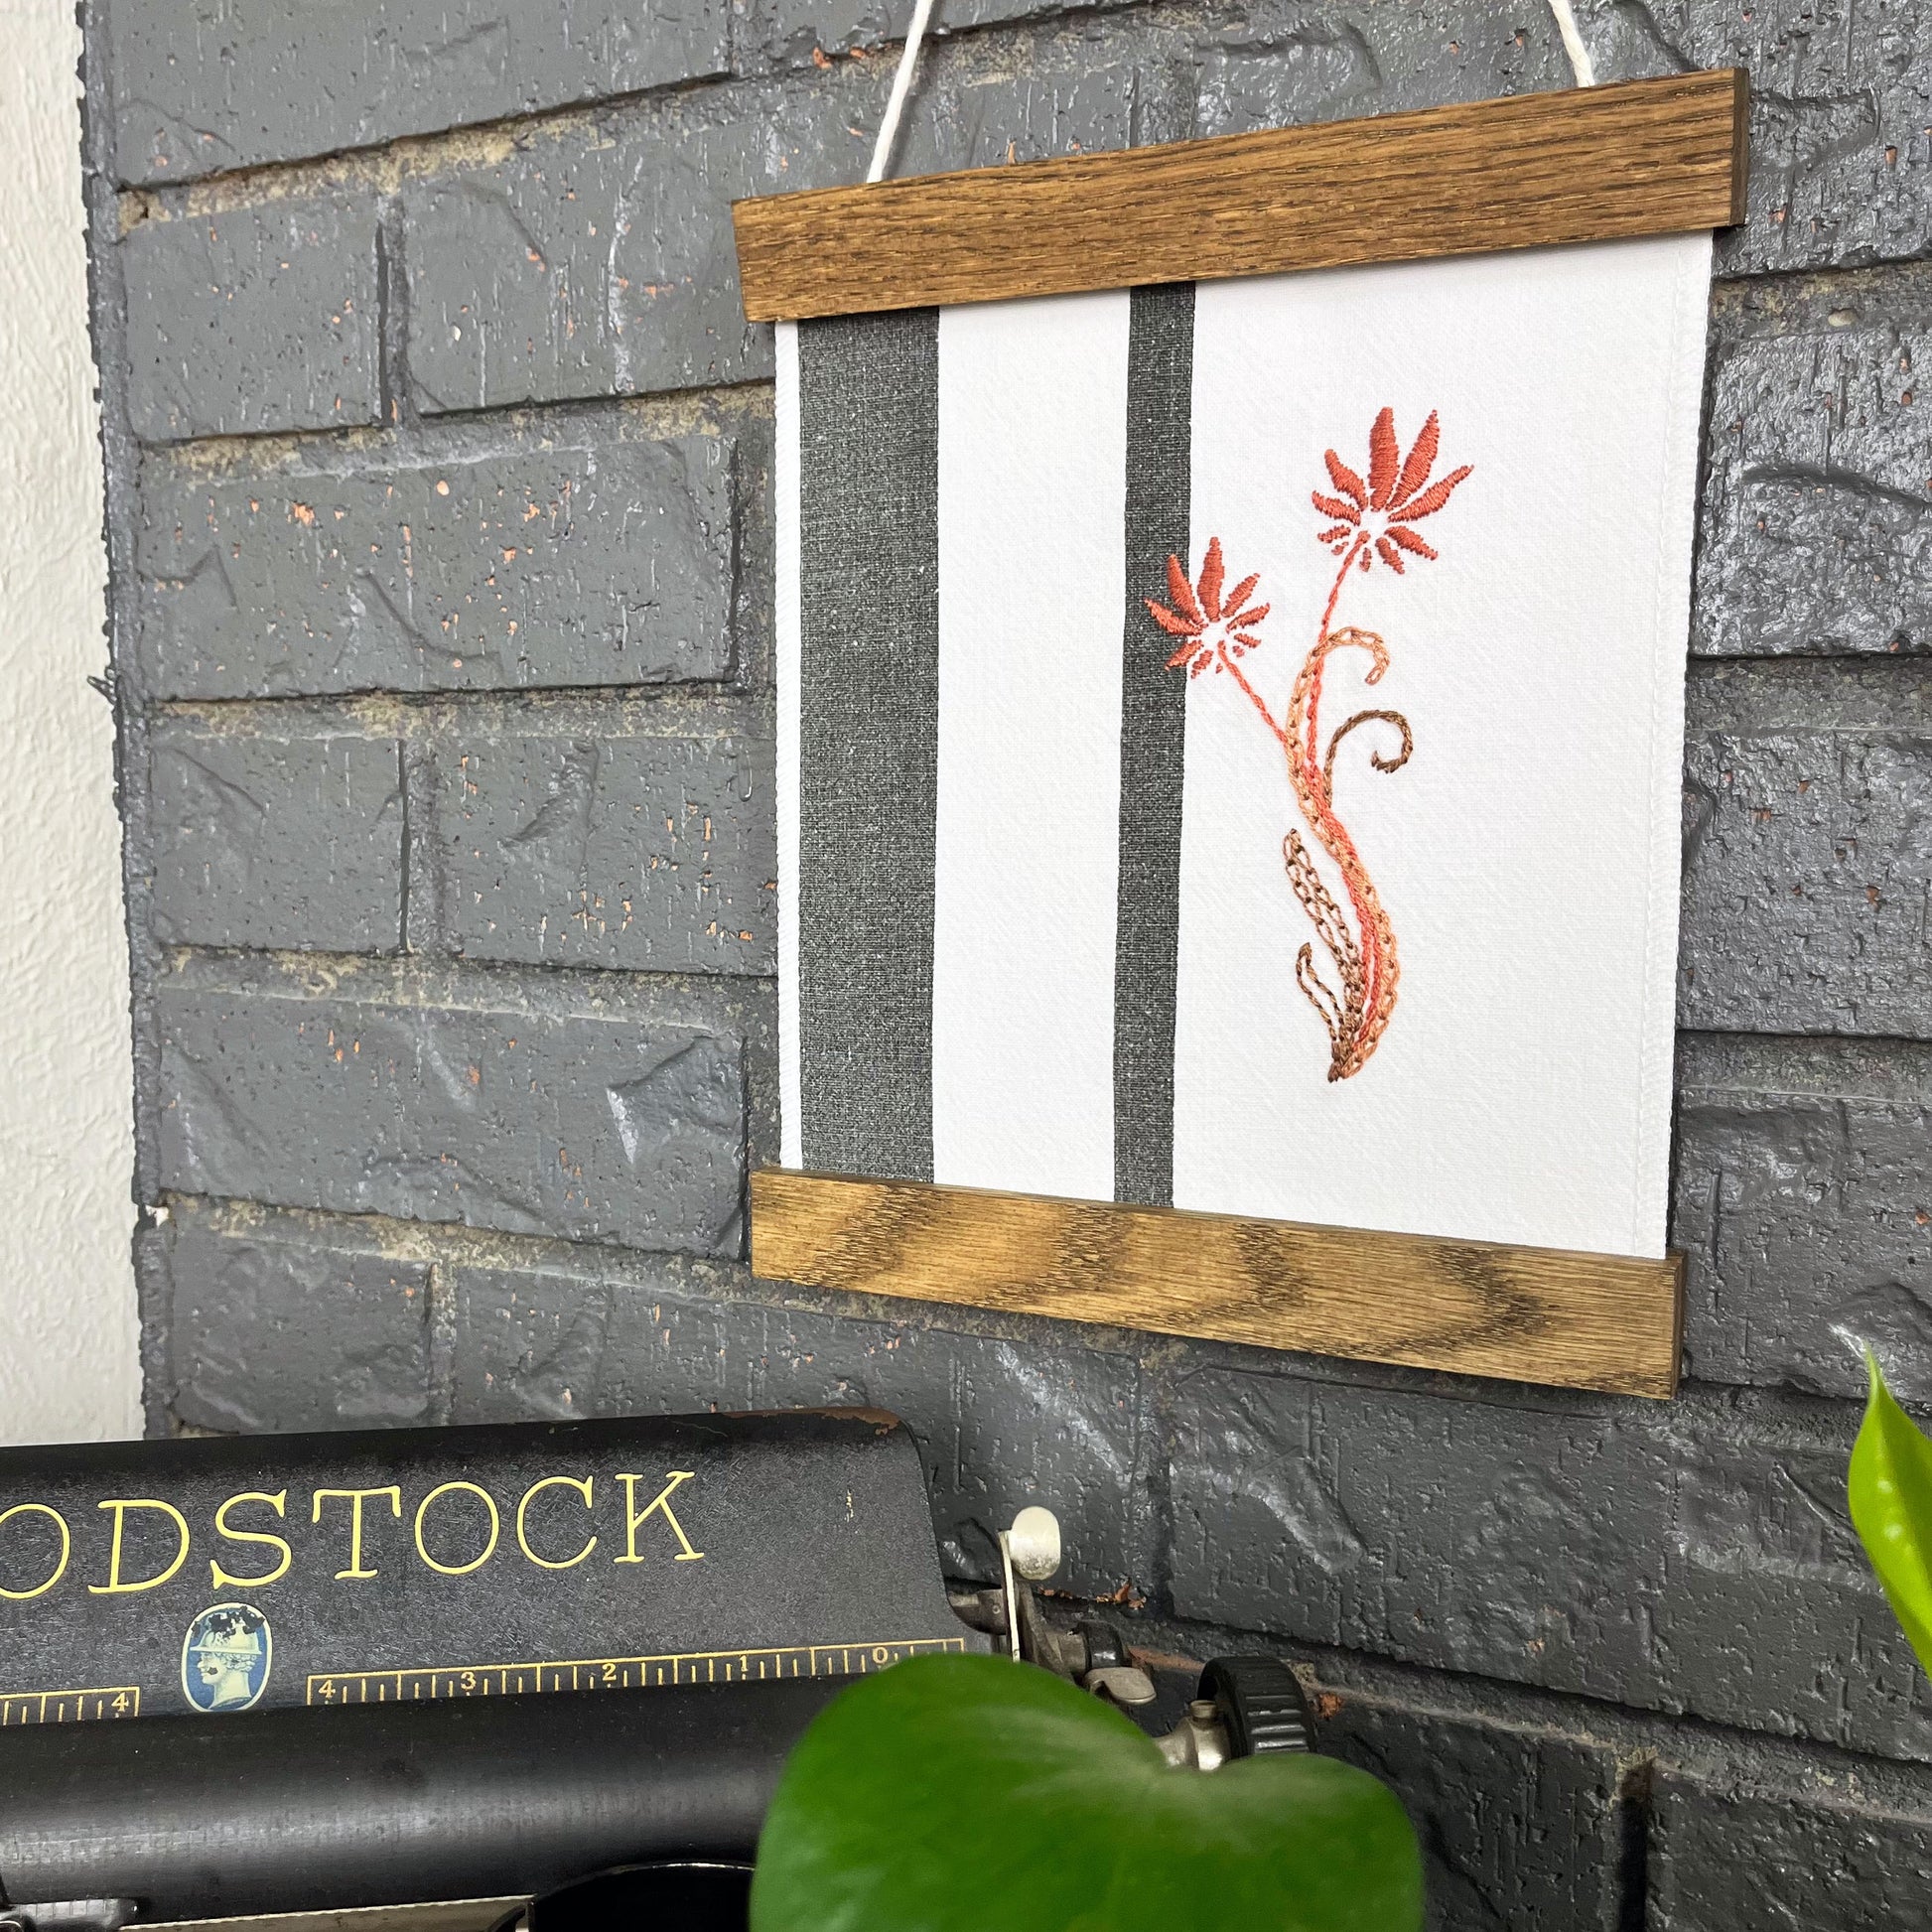 a fabric wall hanging in a wood magnetic frame on a grey wall, made out of white fabric with black vertical stripes, hand stitched with mauve flowers with long curvy stems, a typewriter and pothos plant peek out at the bottom of the frame